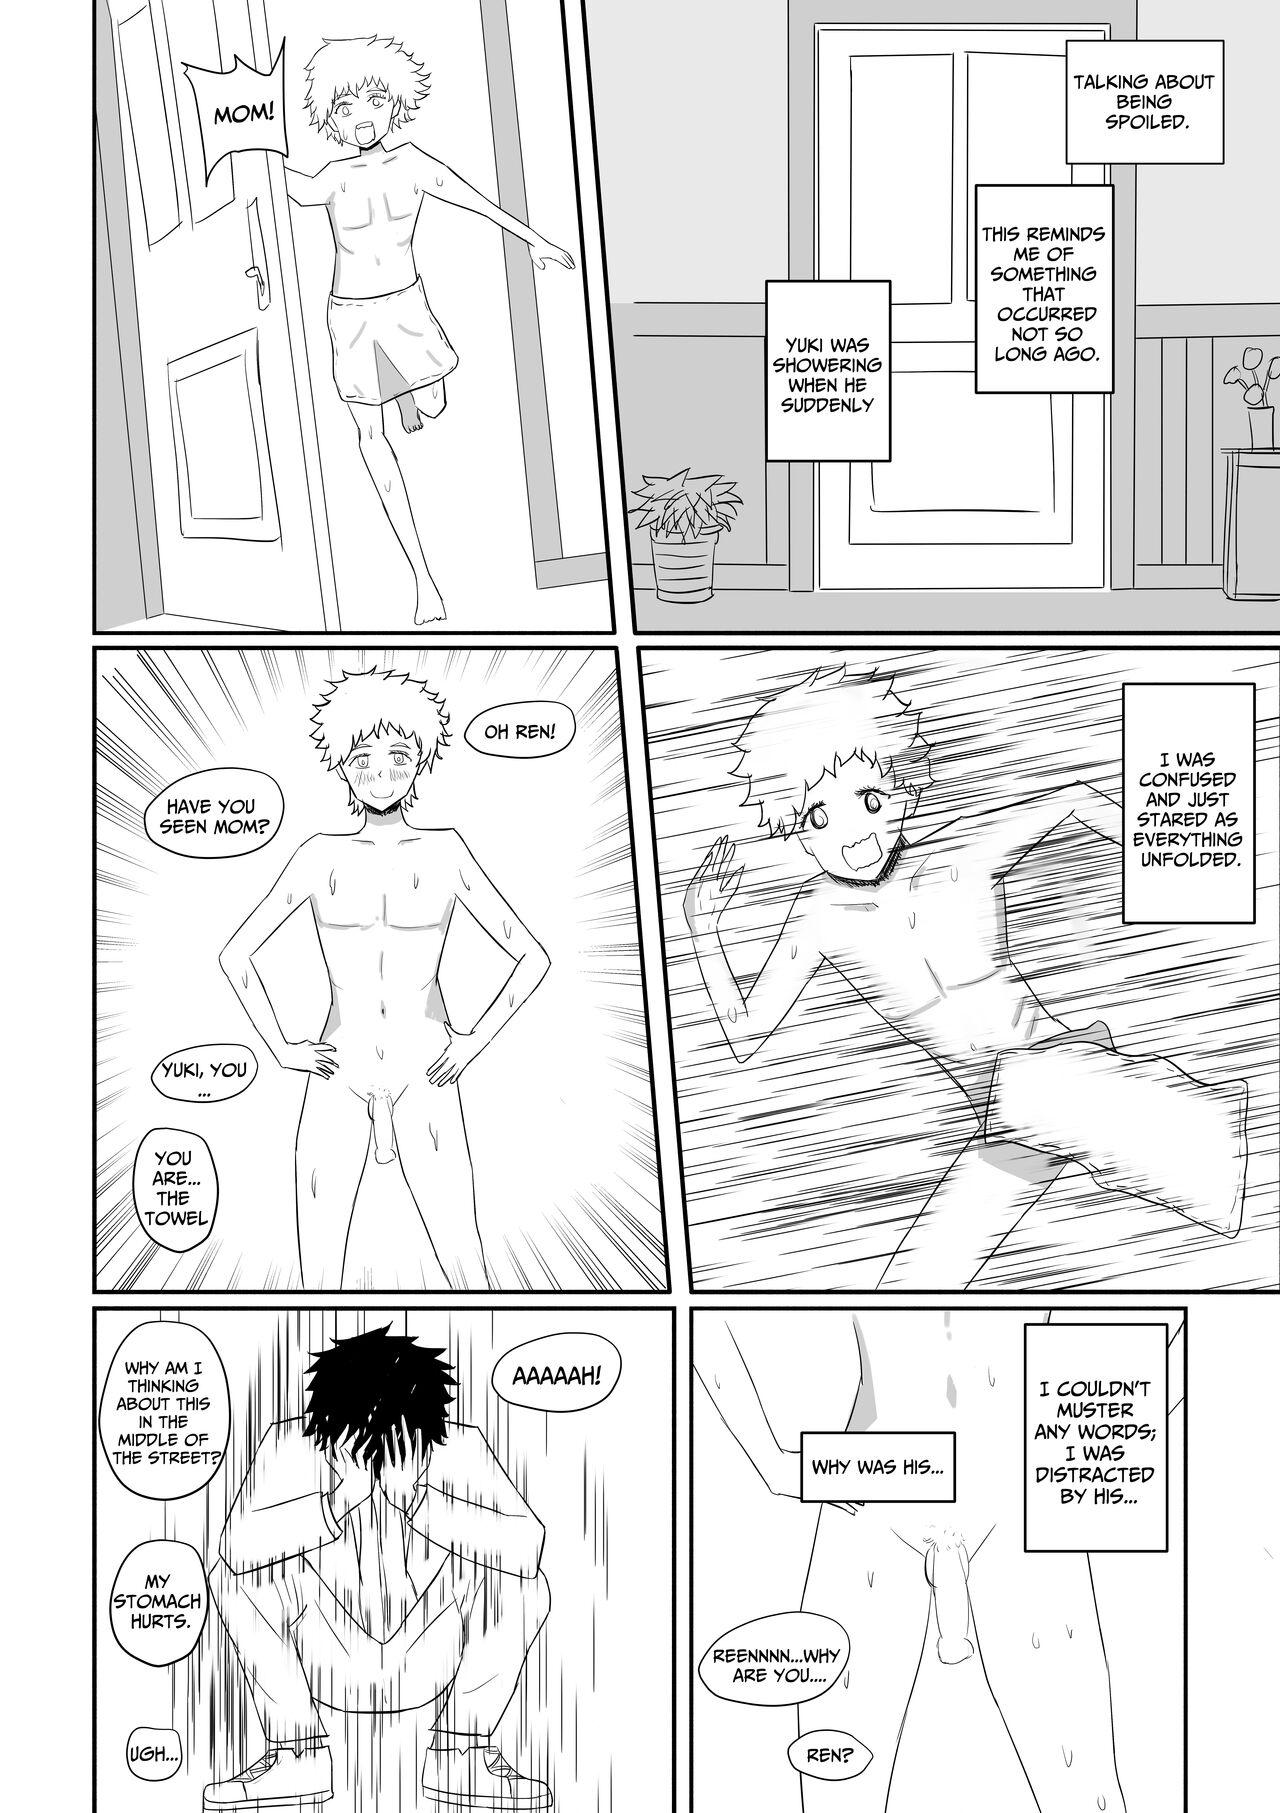 Babysitter Mom and Brother 2.1 ongoing Deutsch - Page 5